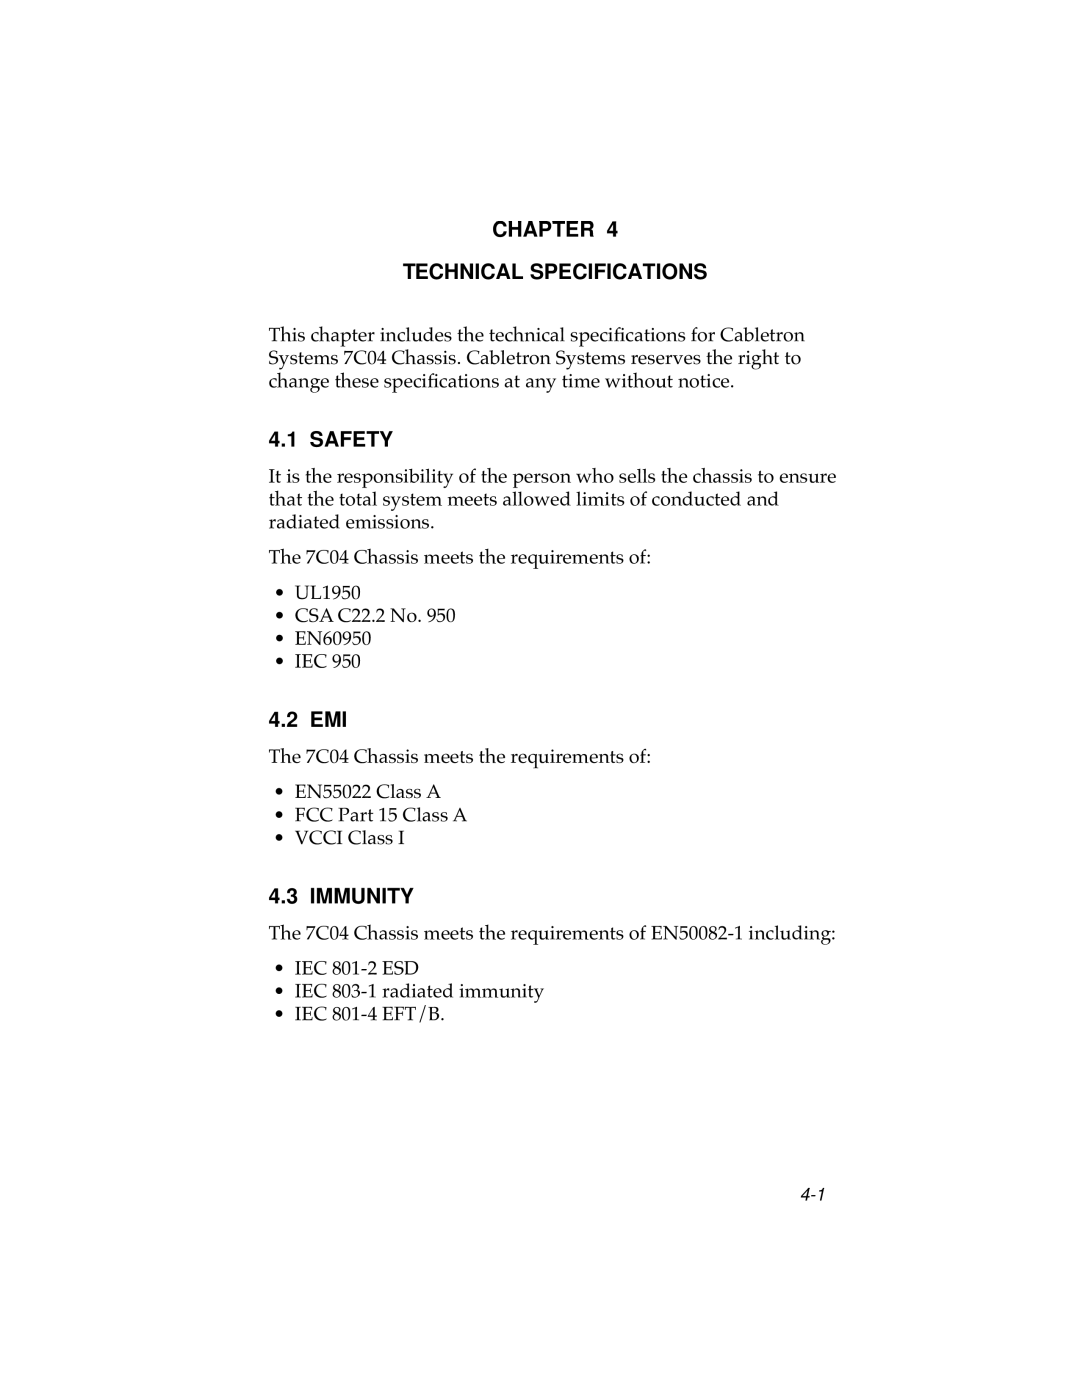 Cabletron Systems 7C04 Workgroup manual Chapter Technical Specifications, Safety, 4.2 EMI, Immunity 